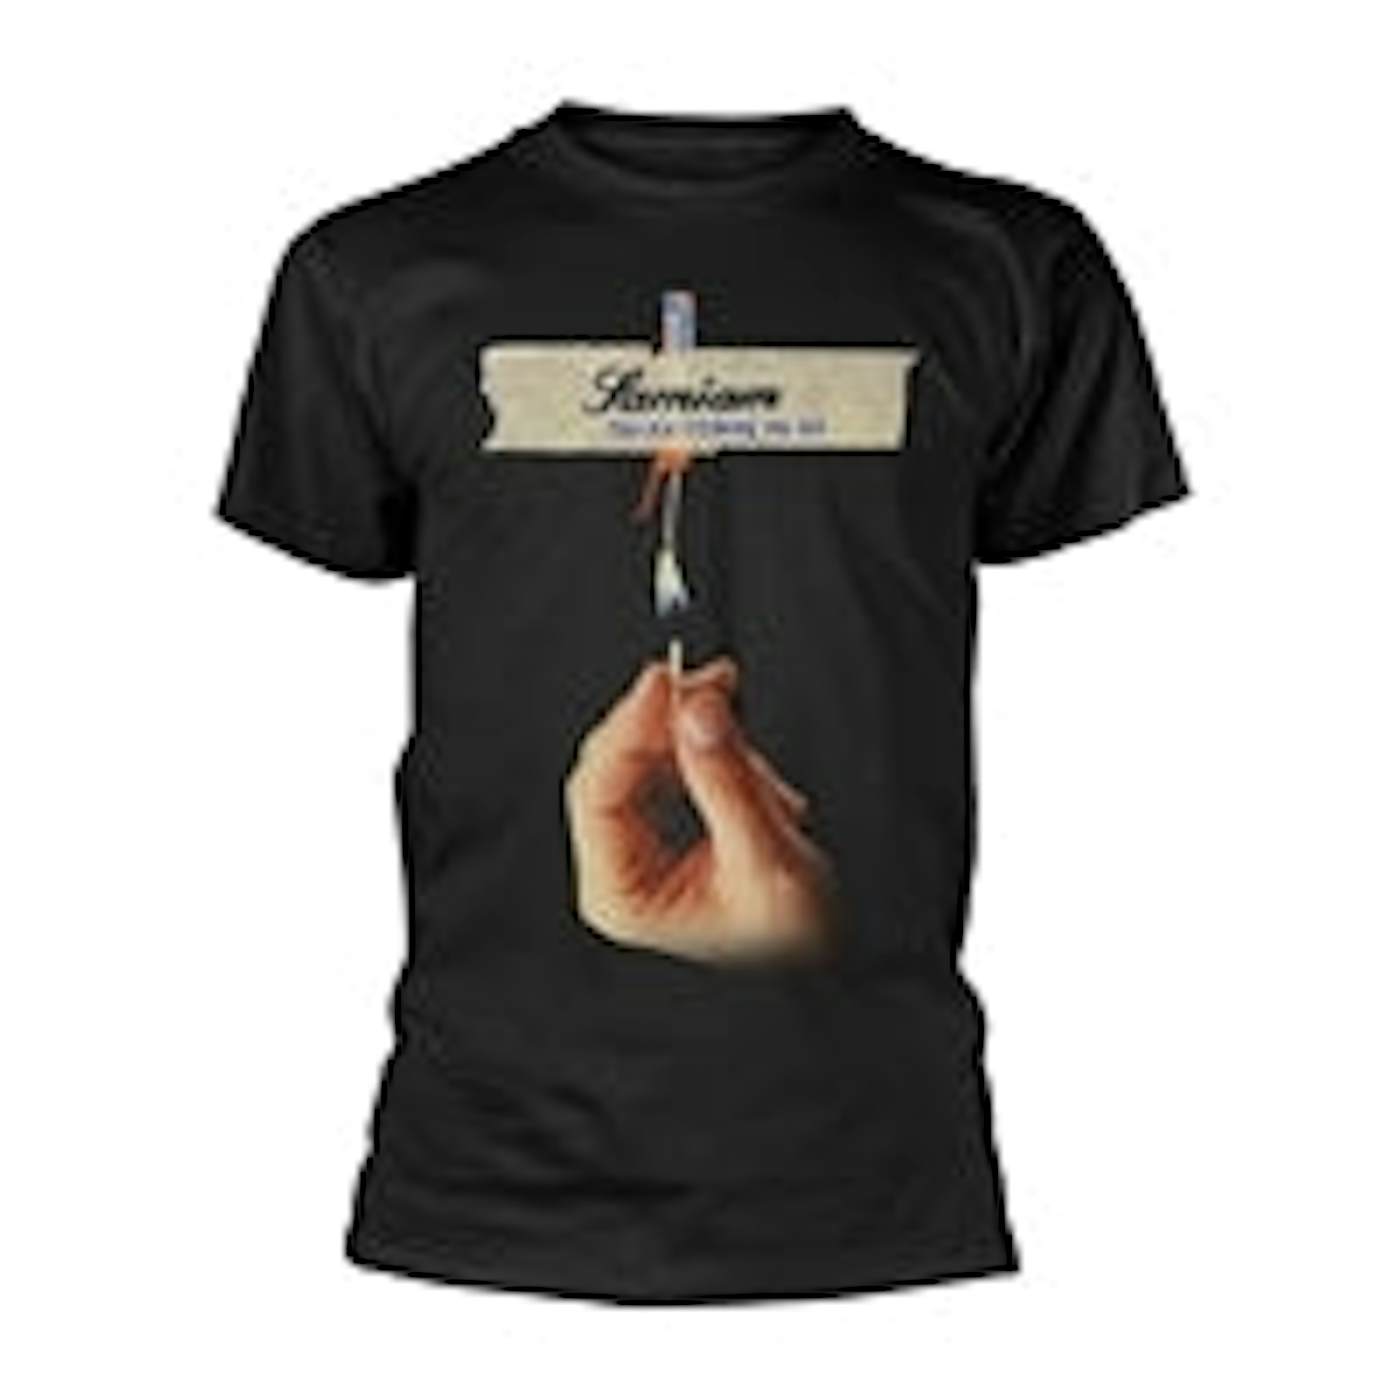 Samiam T Shirt - You Are Freaking Me Out (Organic Ts)